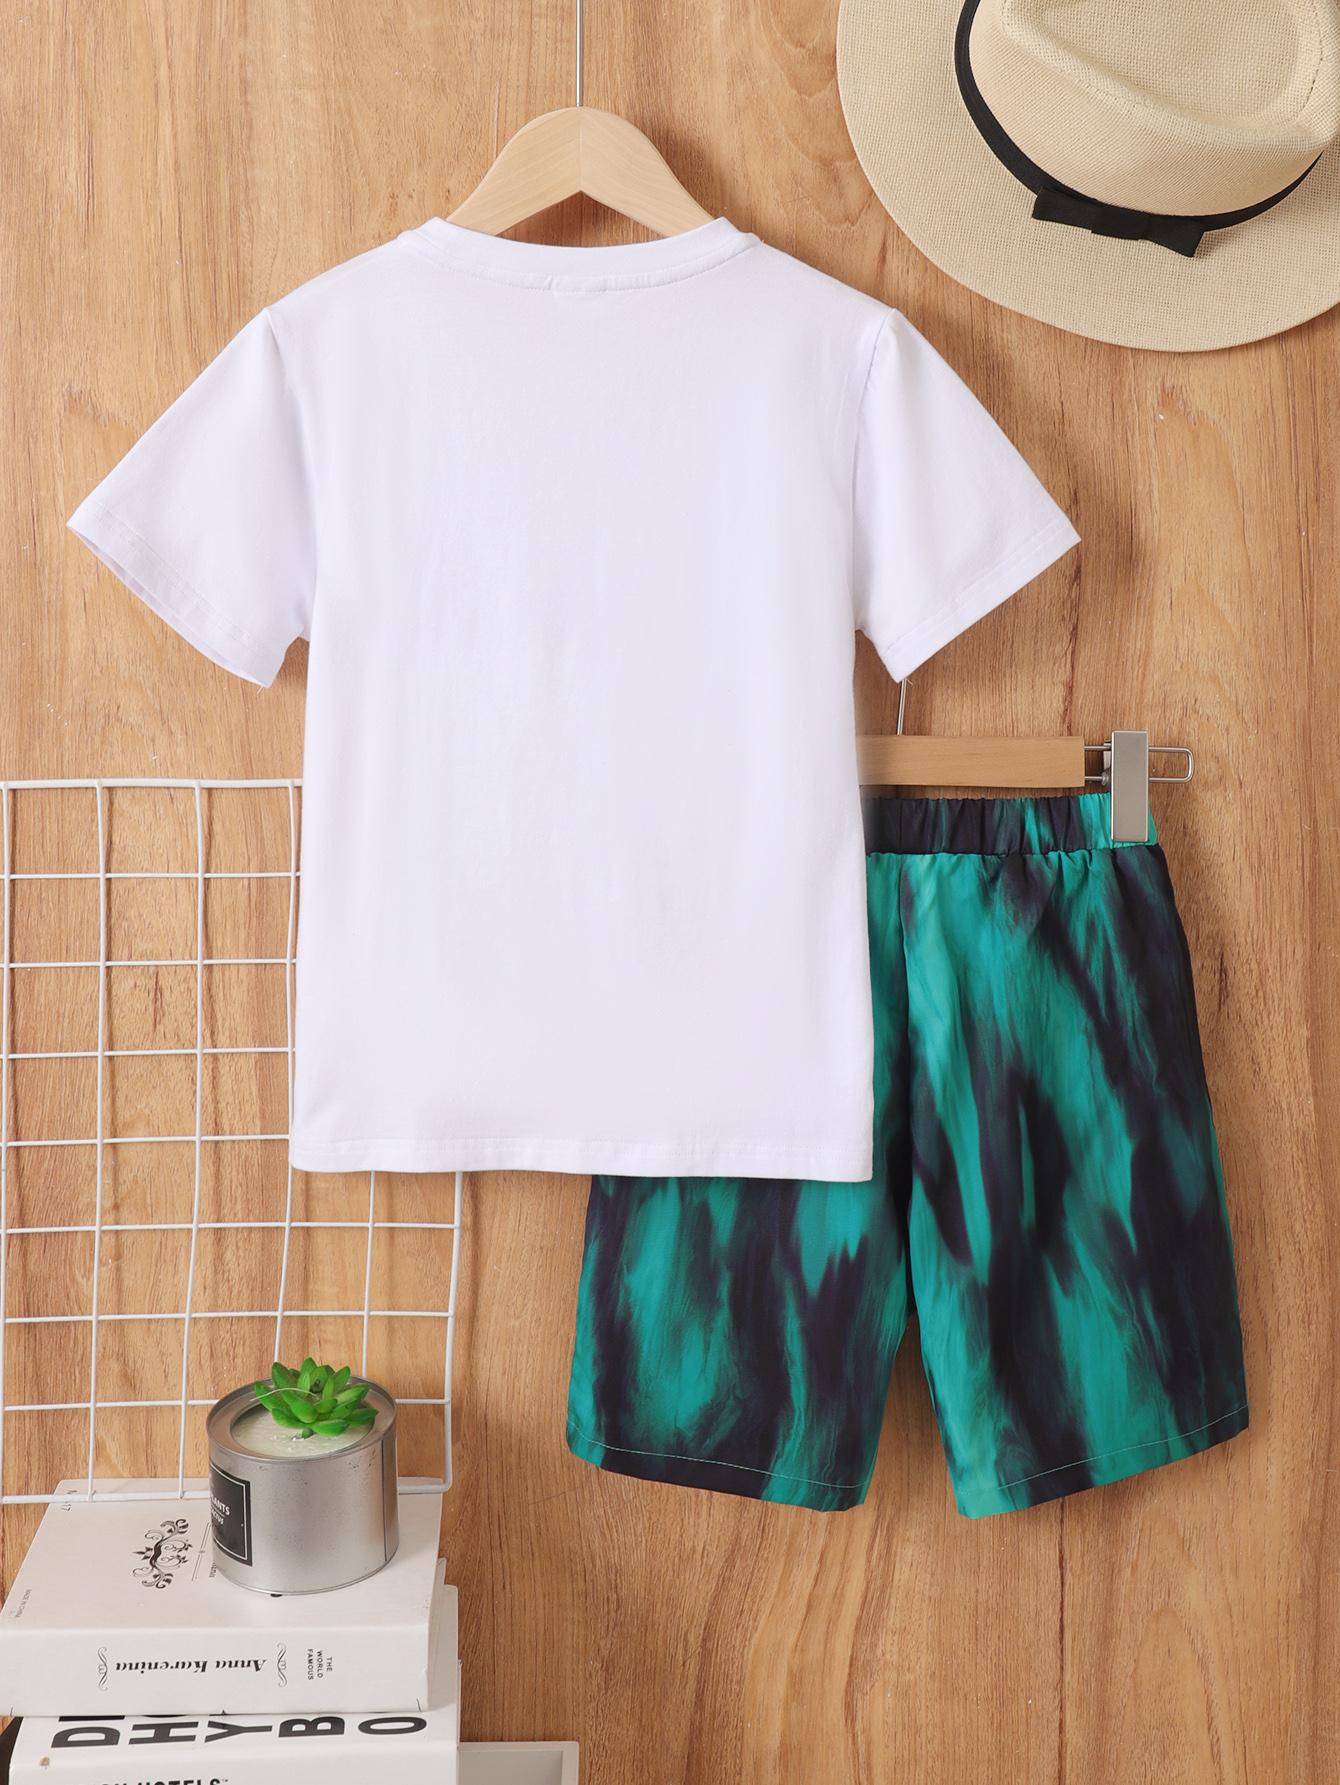 5-12Y Ready Stock Kid Boys Clothes Boys OOTD Car Print Letter Print Summer Tops Elastic Tie-dye Shorts 2Pcs Outfits White Catpapa  462303004